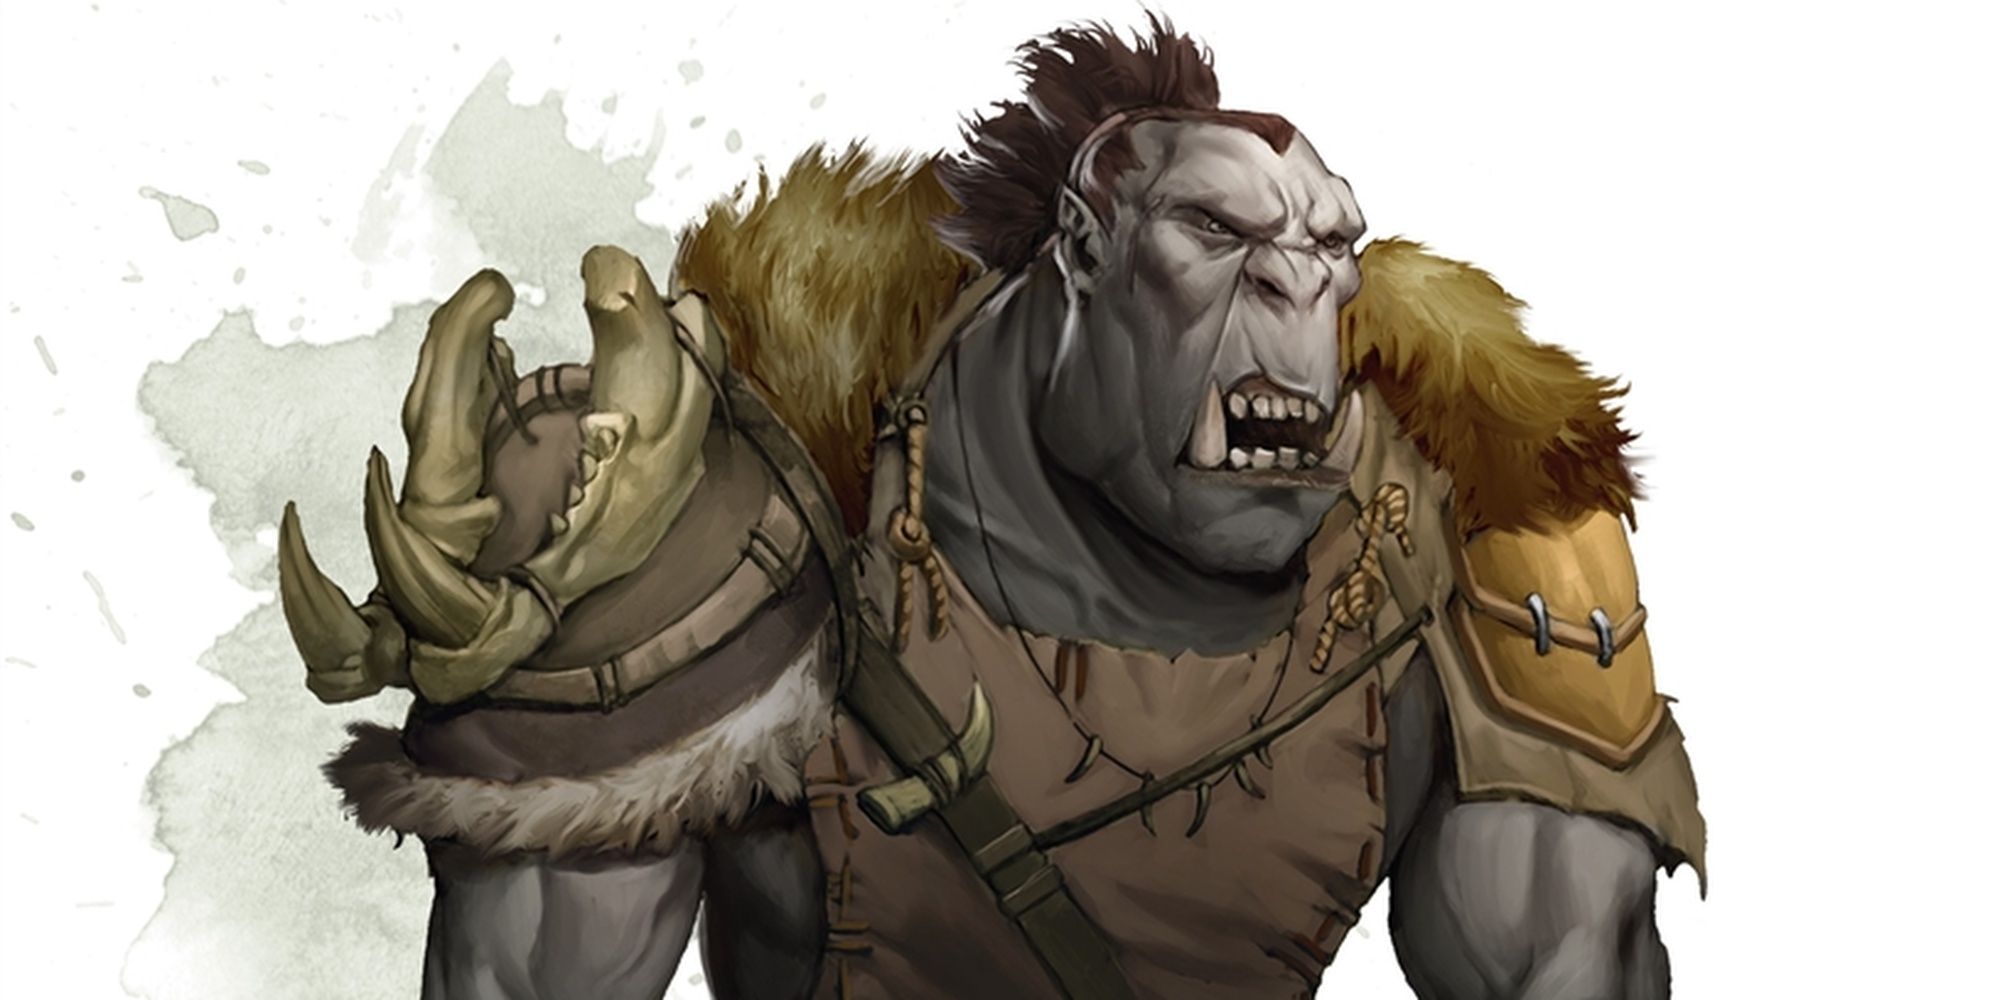 The Orc image featured in Dungeons and Dragons' Monster's Manual